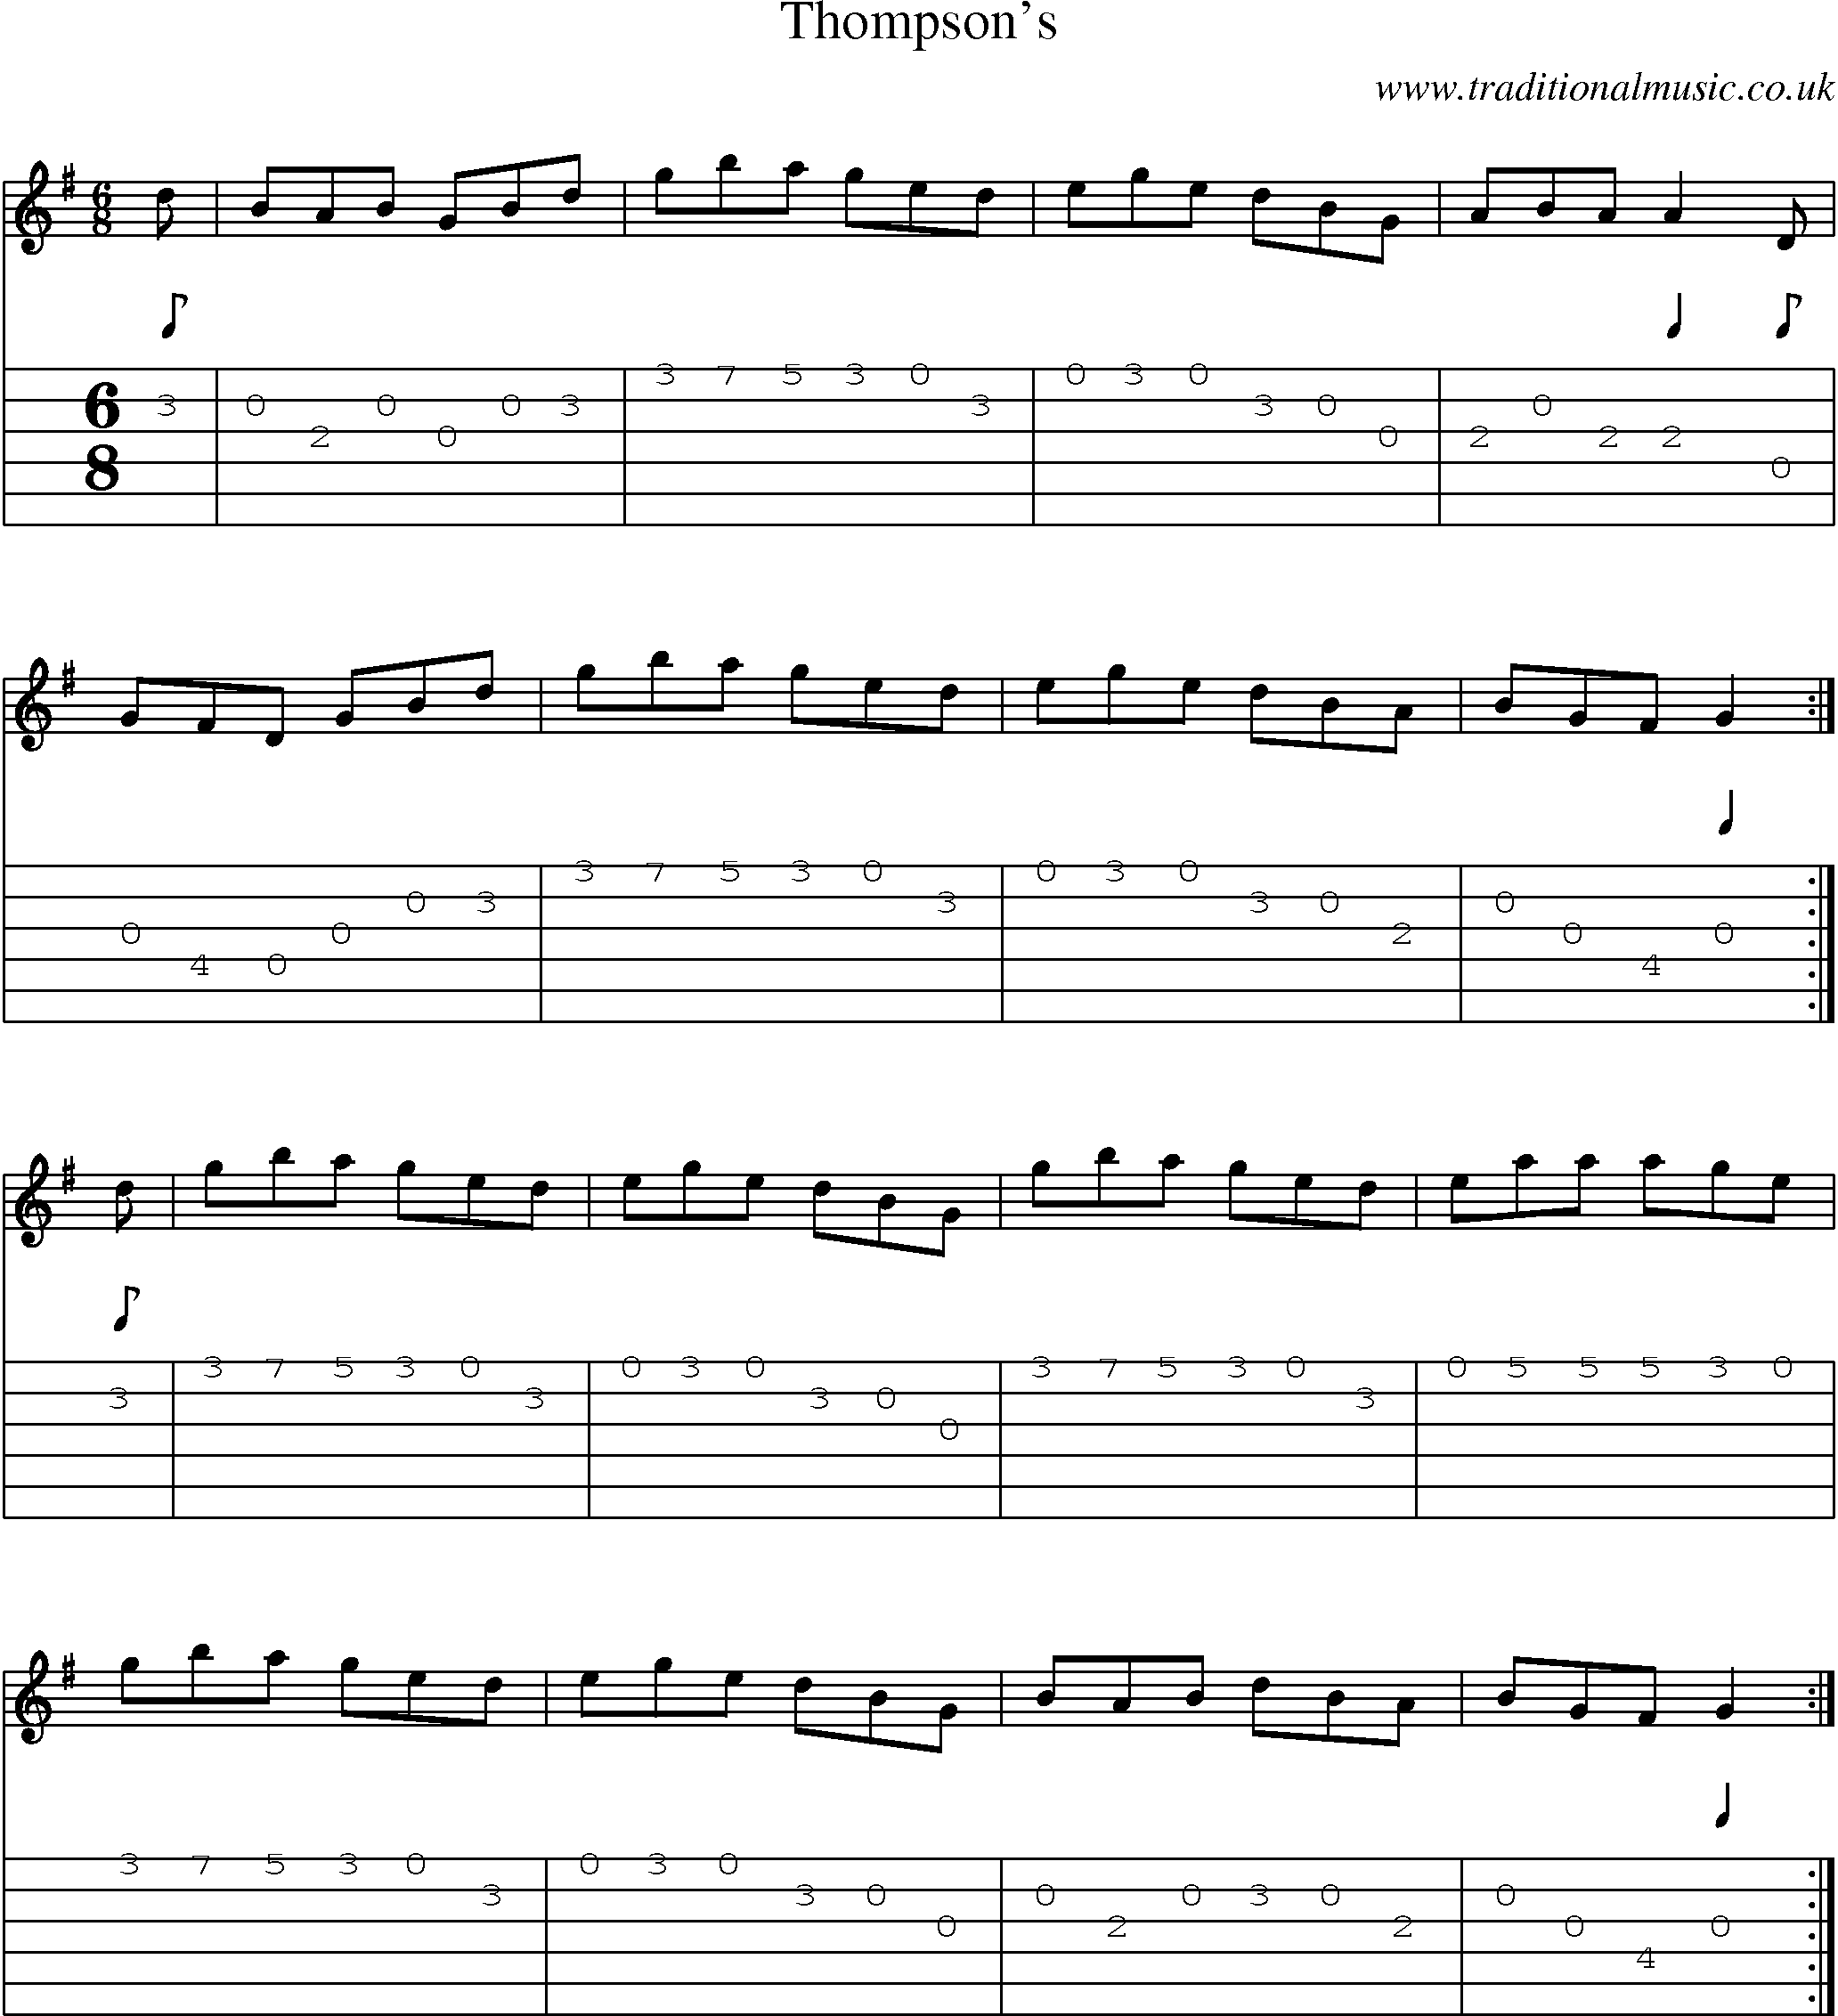 Music Score and Guitar Tabs for Thompsons